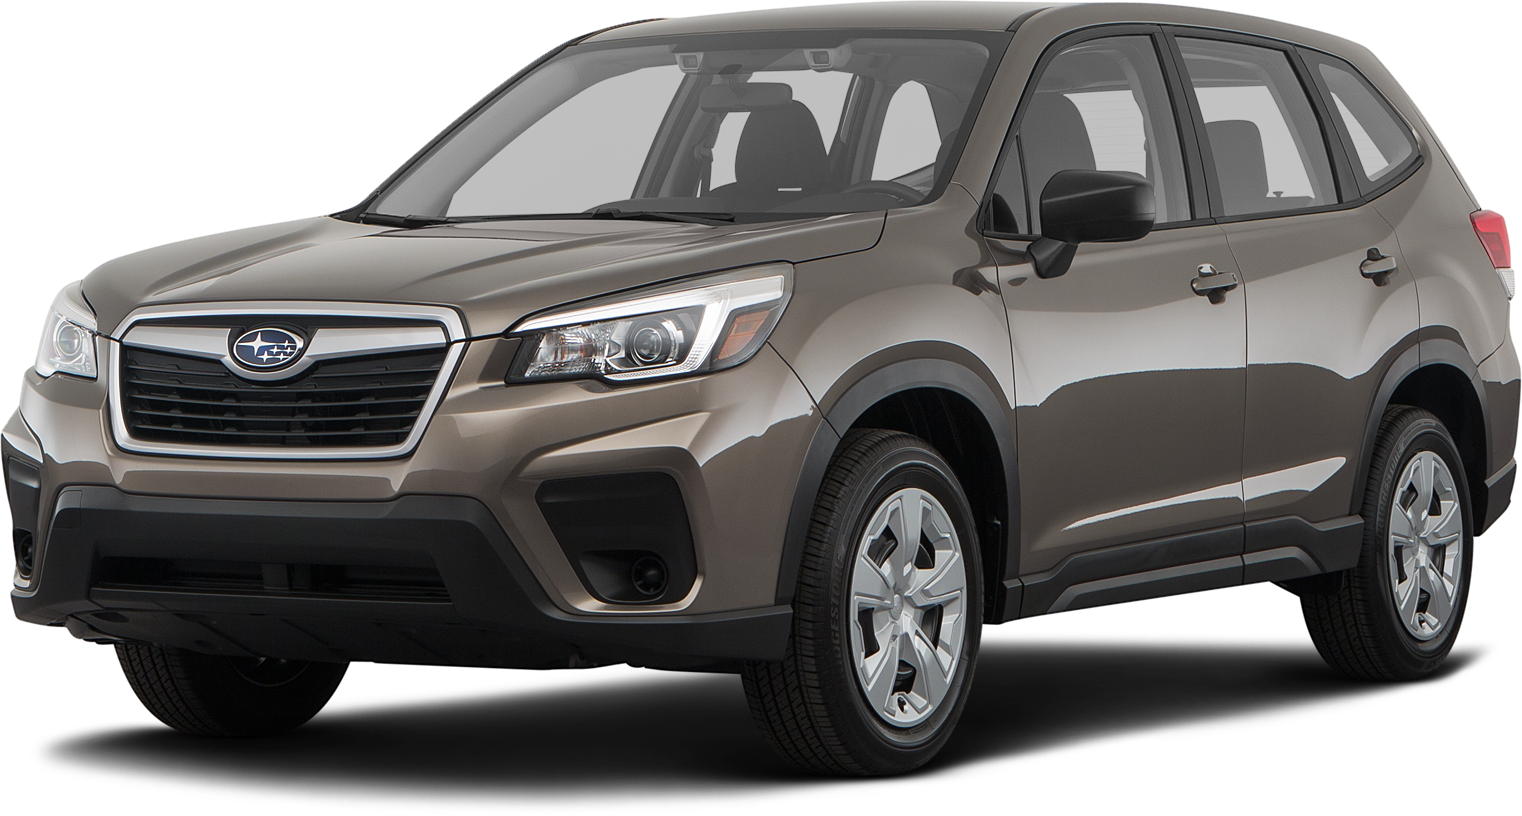 2019 Subaru Forester Incentives Specials Offers In Colma CA